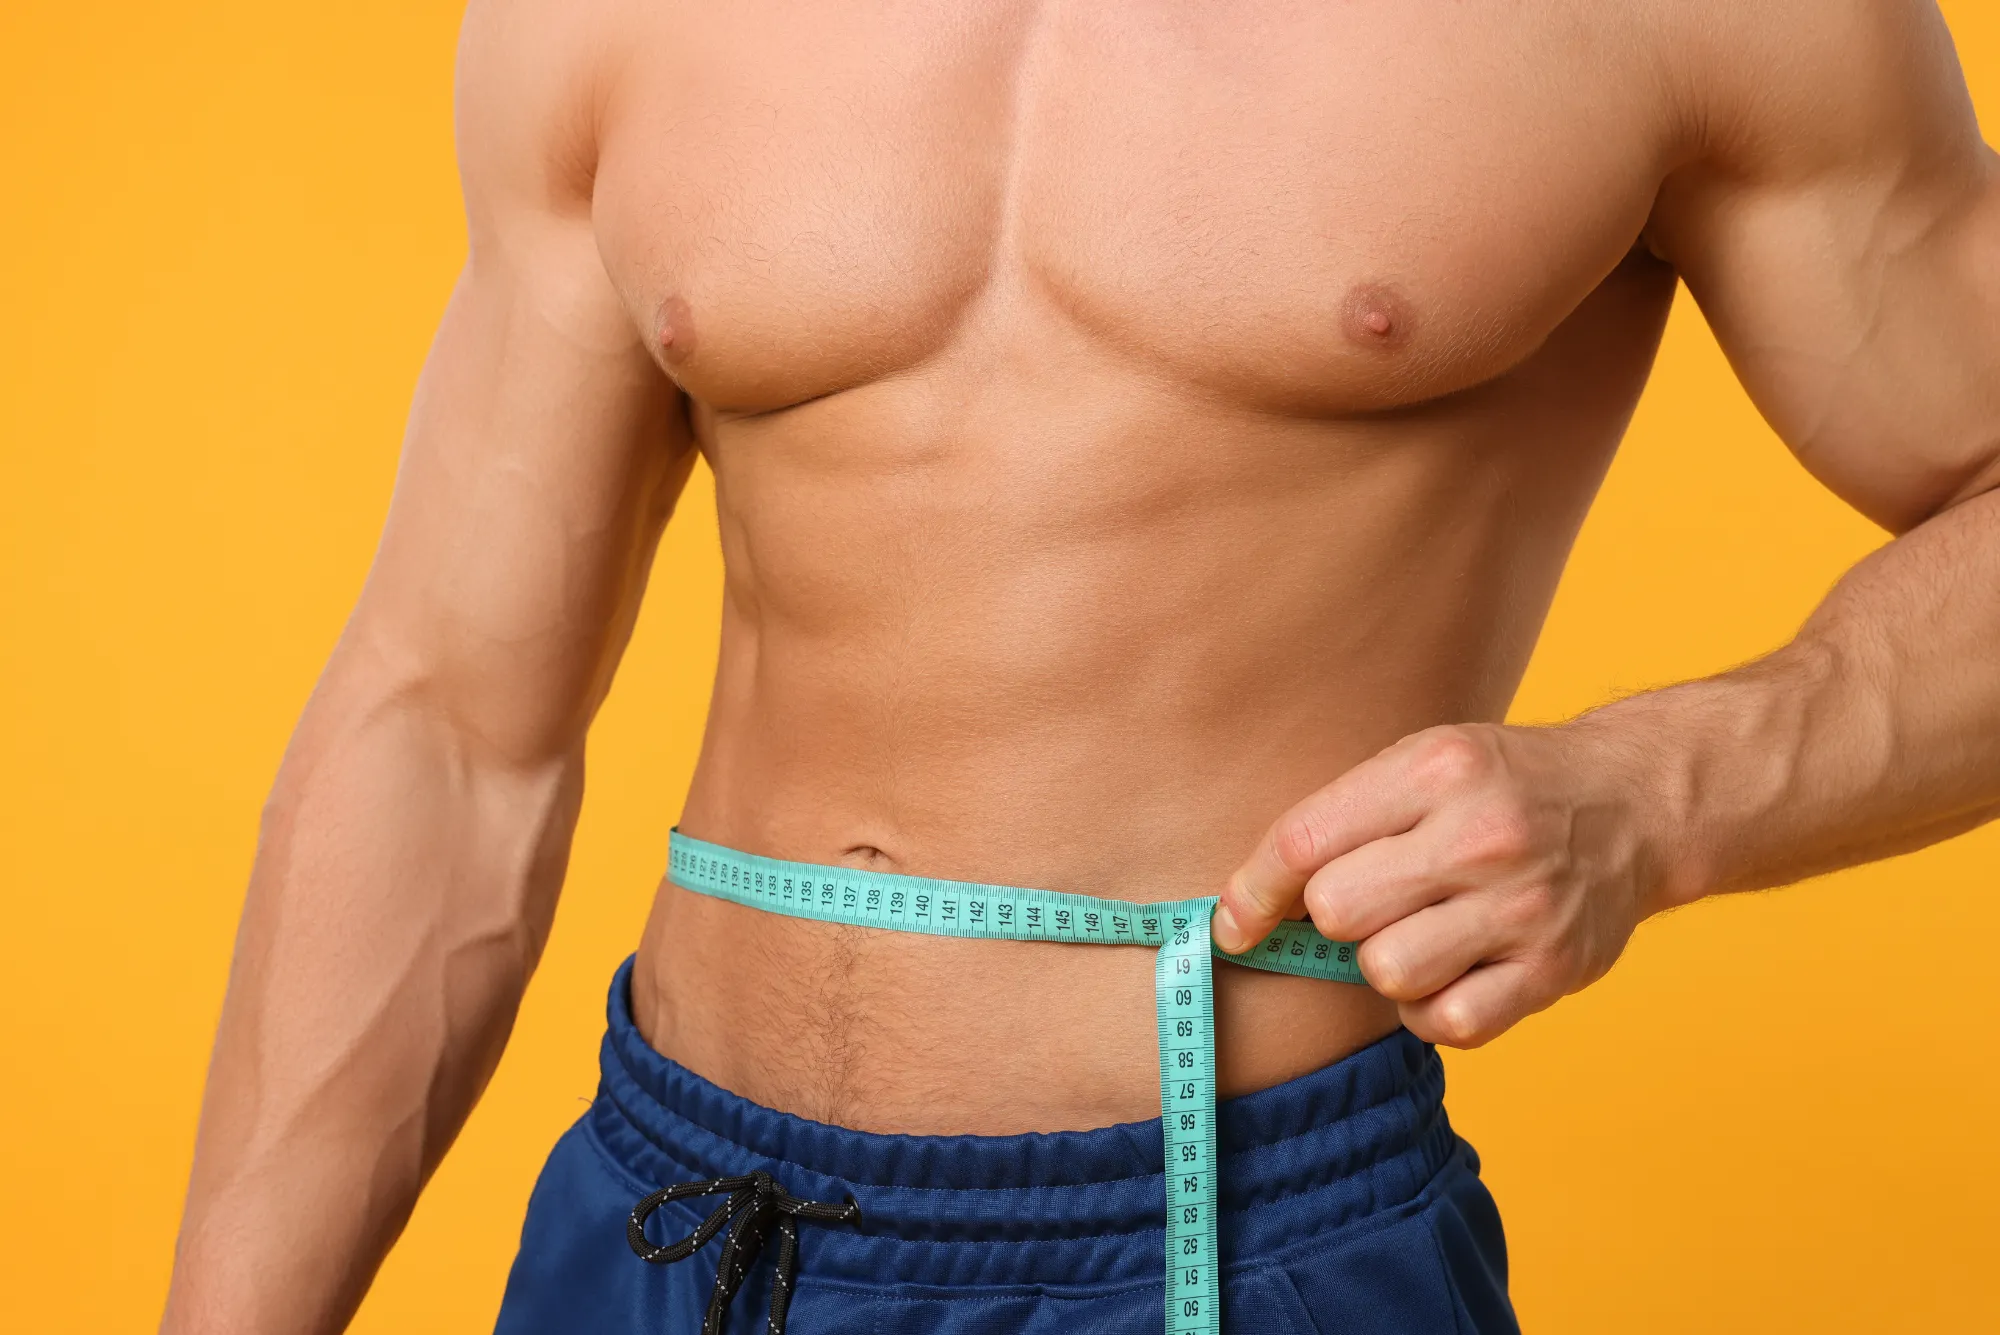 Build Muscle and Lose Fat on Maintenance Calories